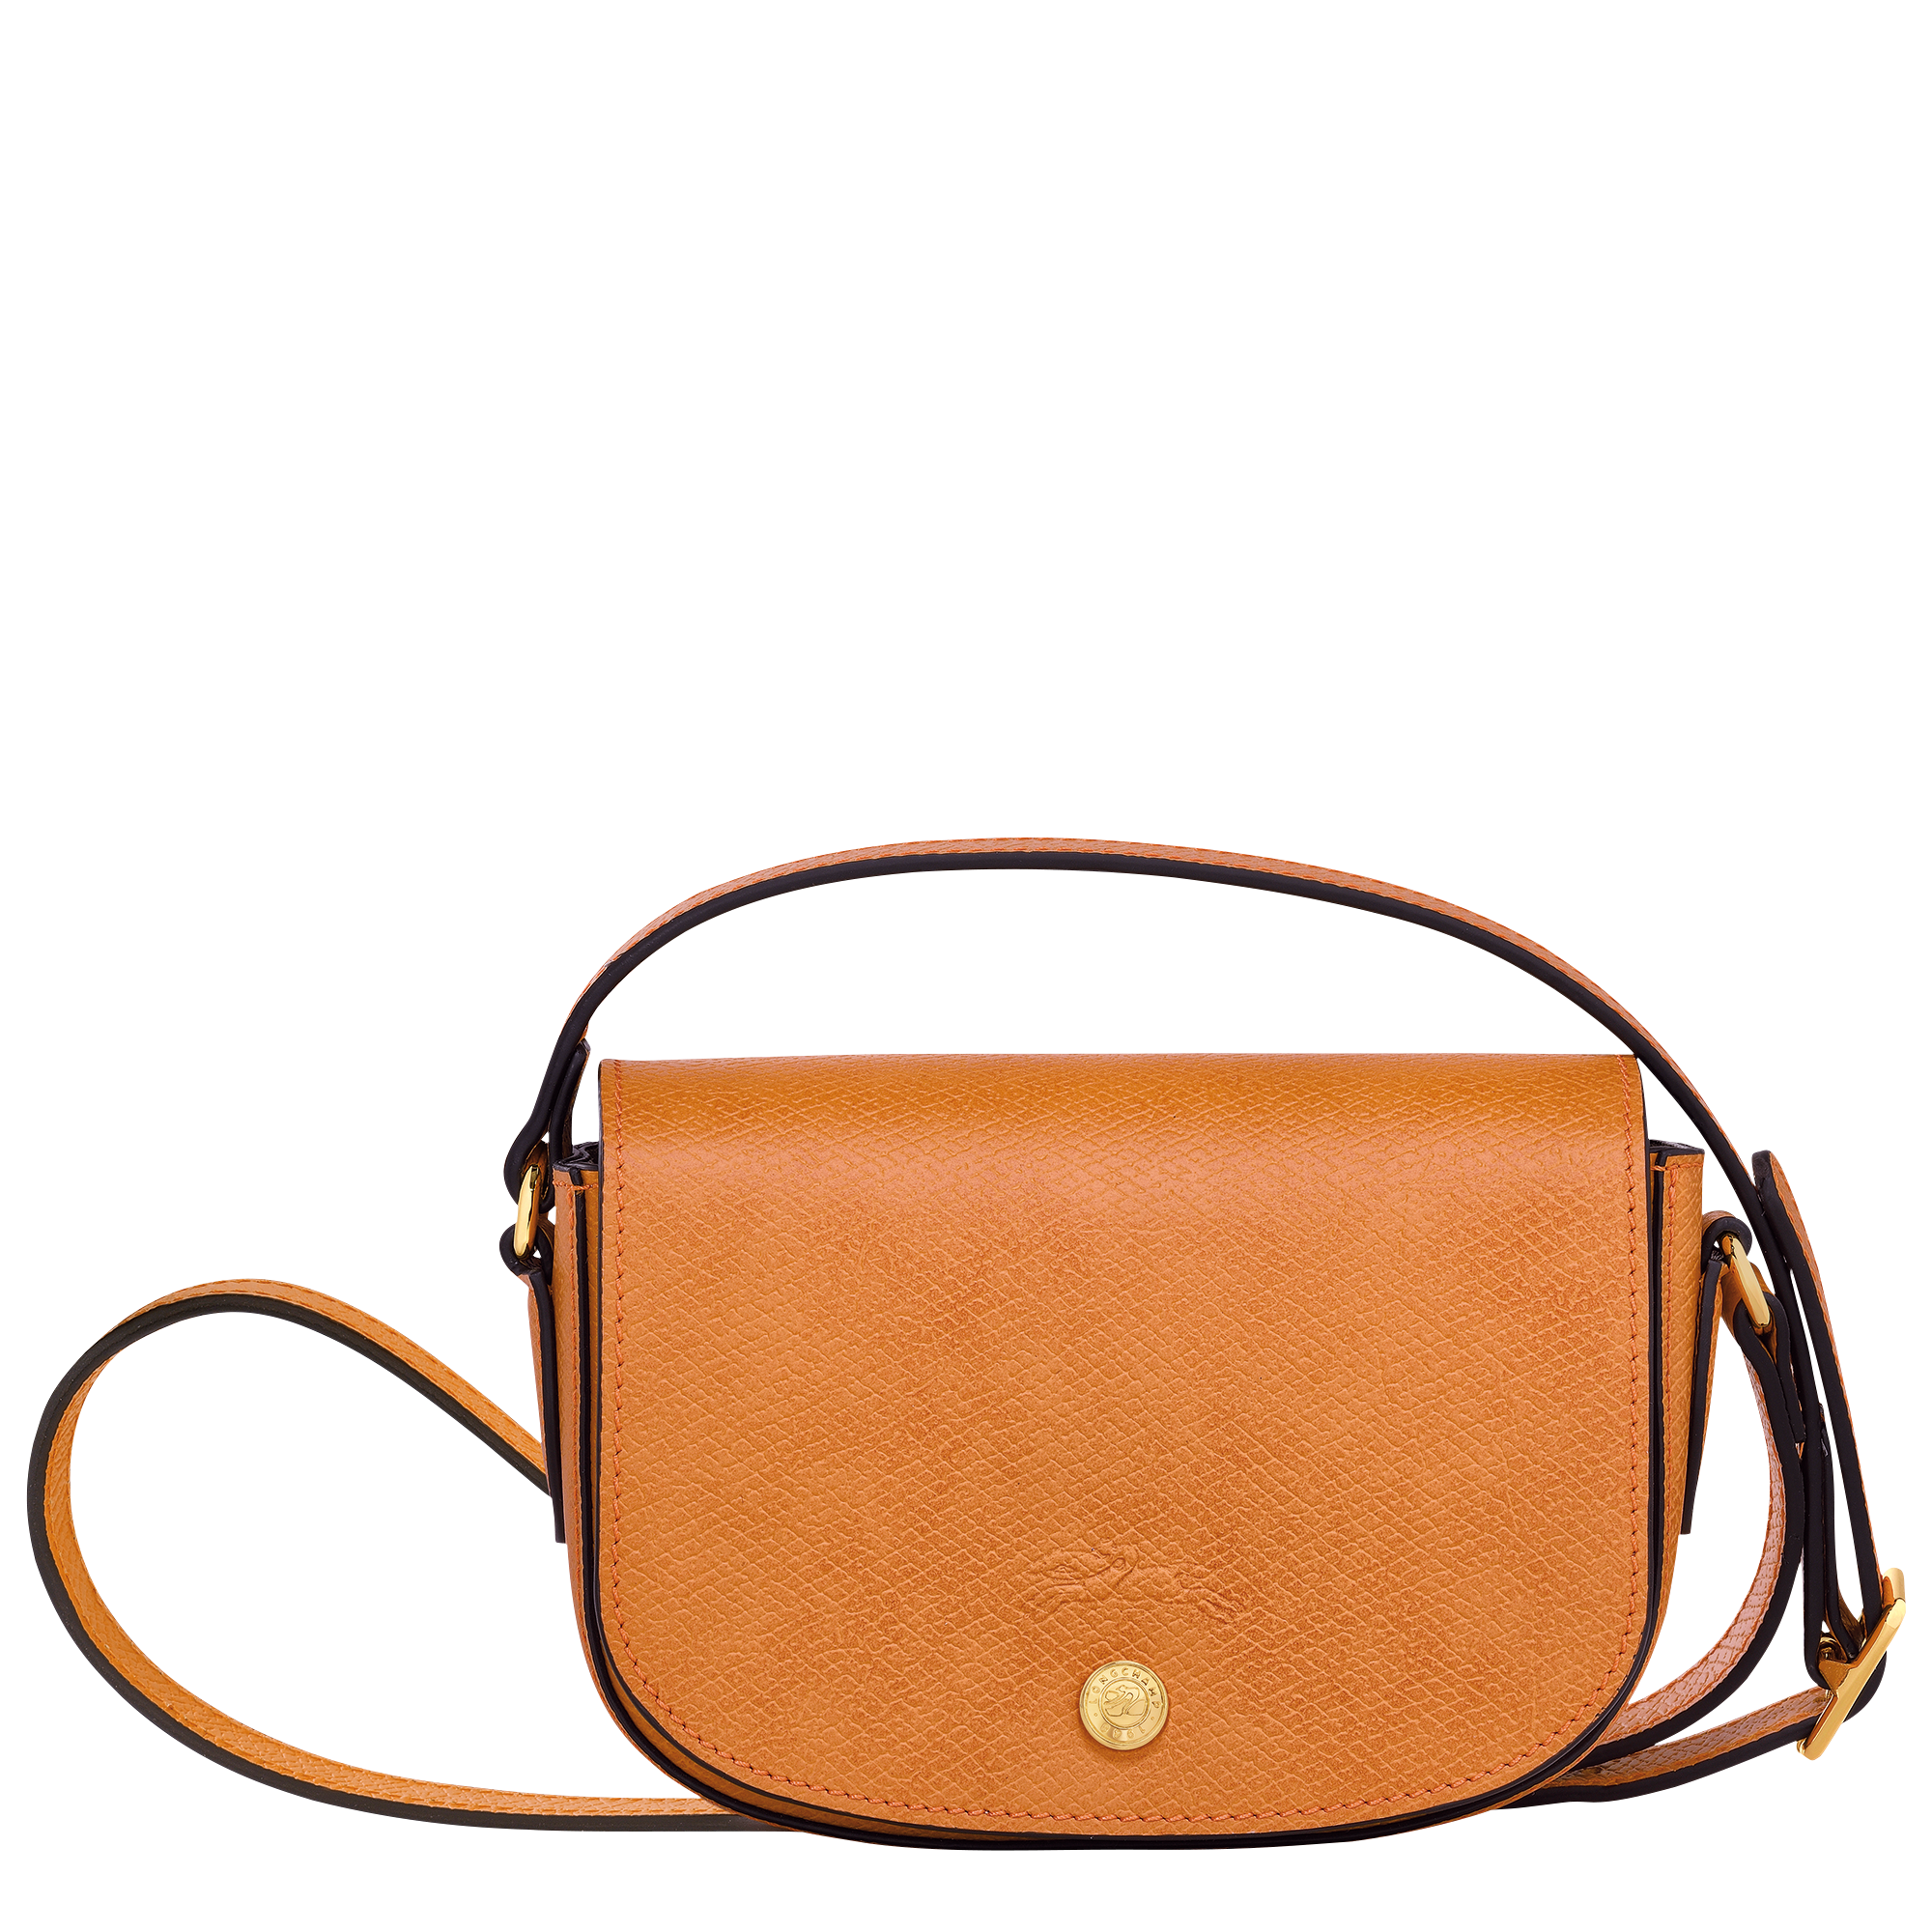 HOXIS Clear Saddle Cross Body Bag Women Chain Shoulder India | Ubuy